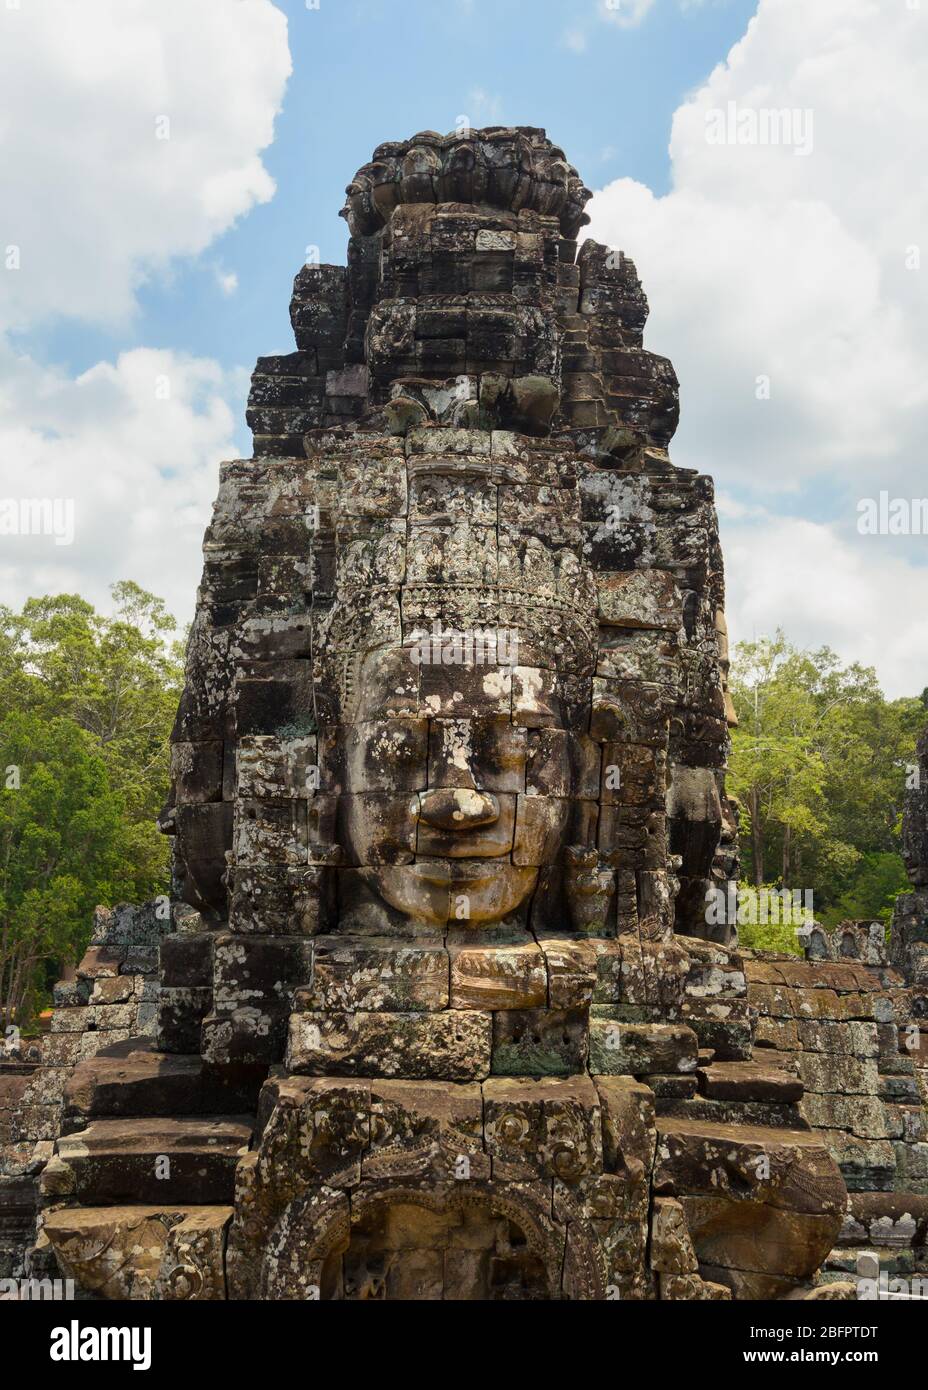 Sculpted King Face On A Stupa In Angkor Thom Bayon Hindu Temple In Angkor Wat Unesco Park Siem Reap Cambodia Stock Photo Alamy